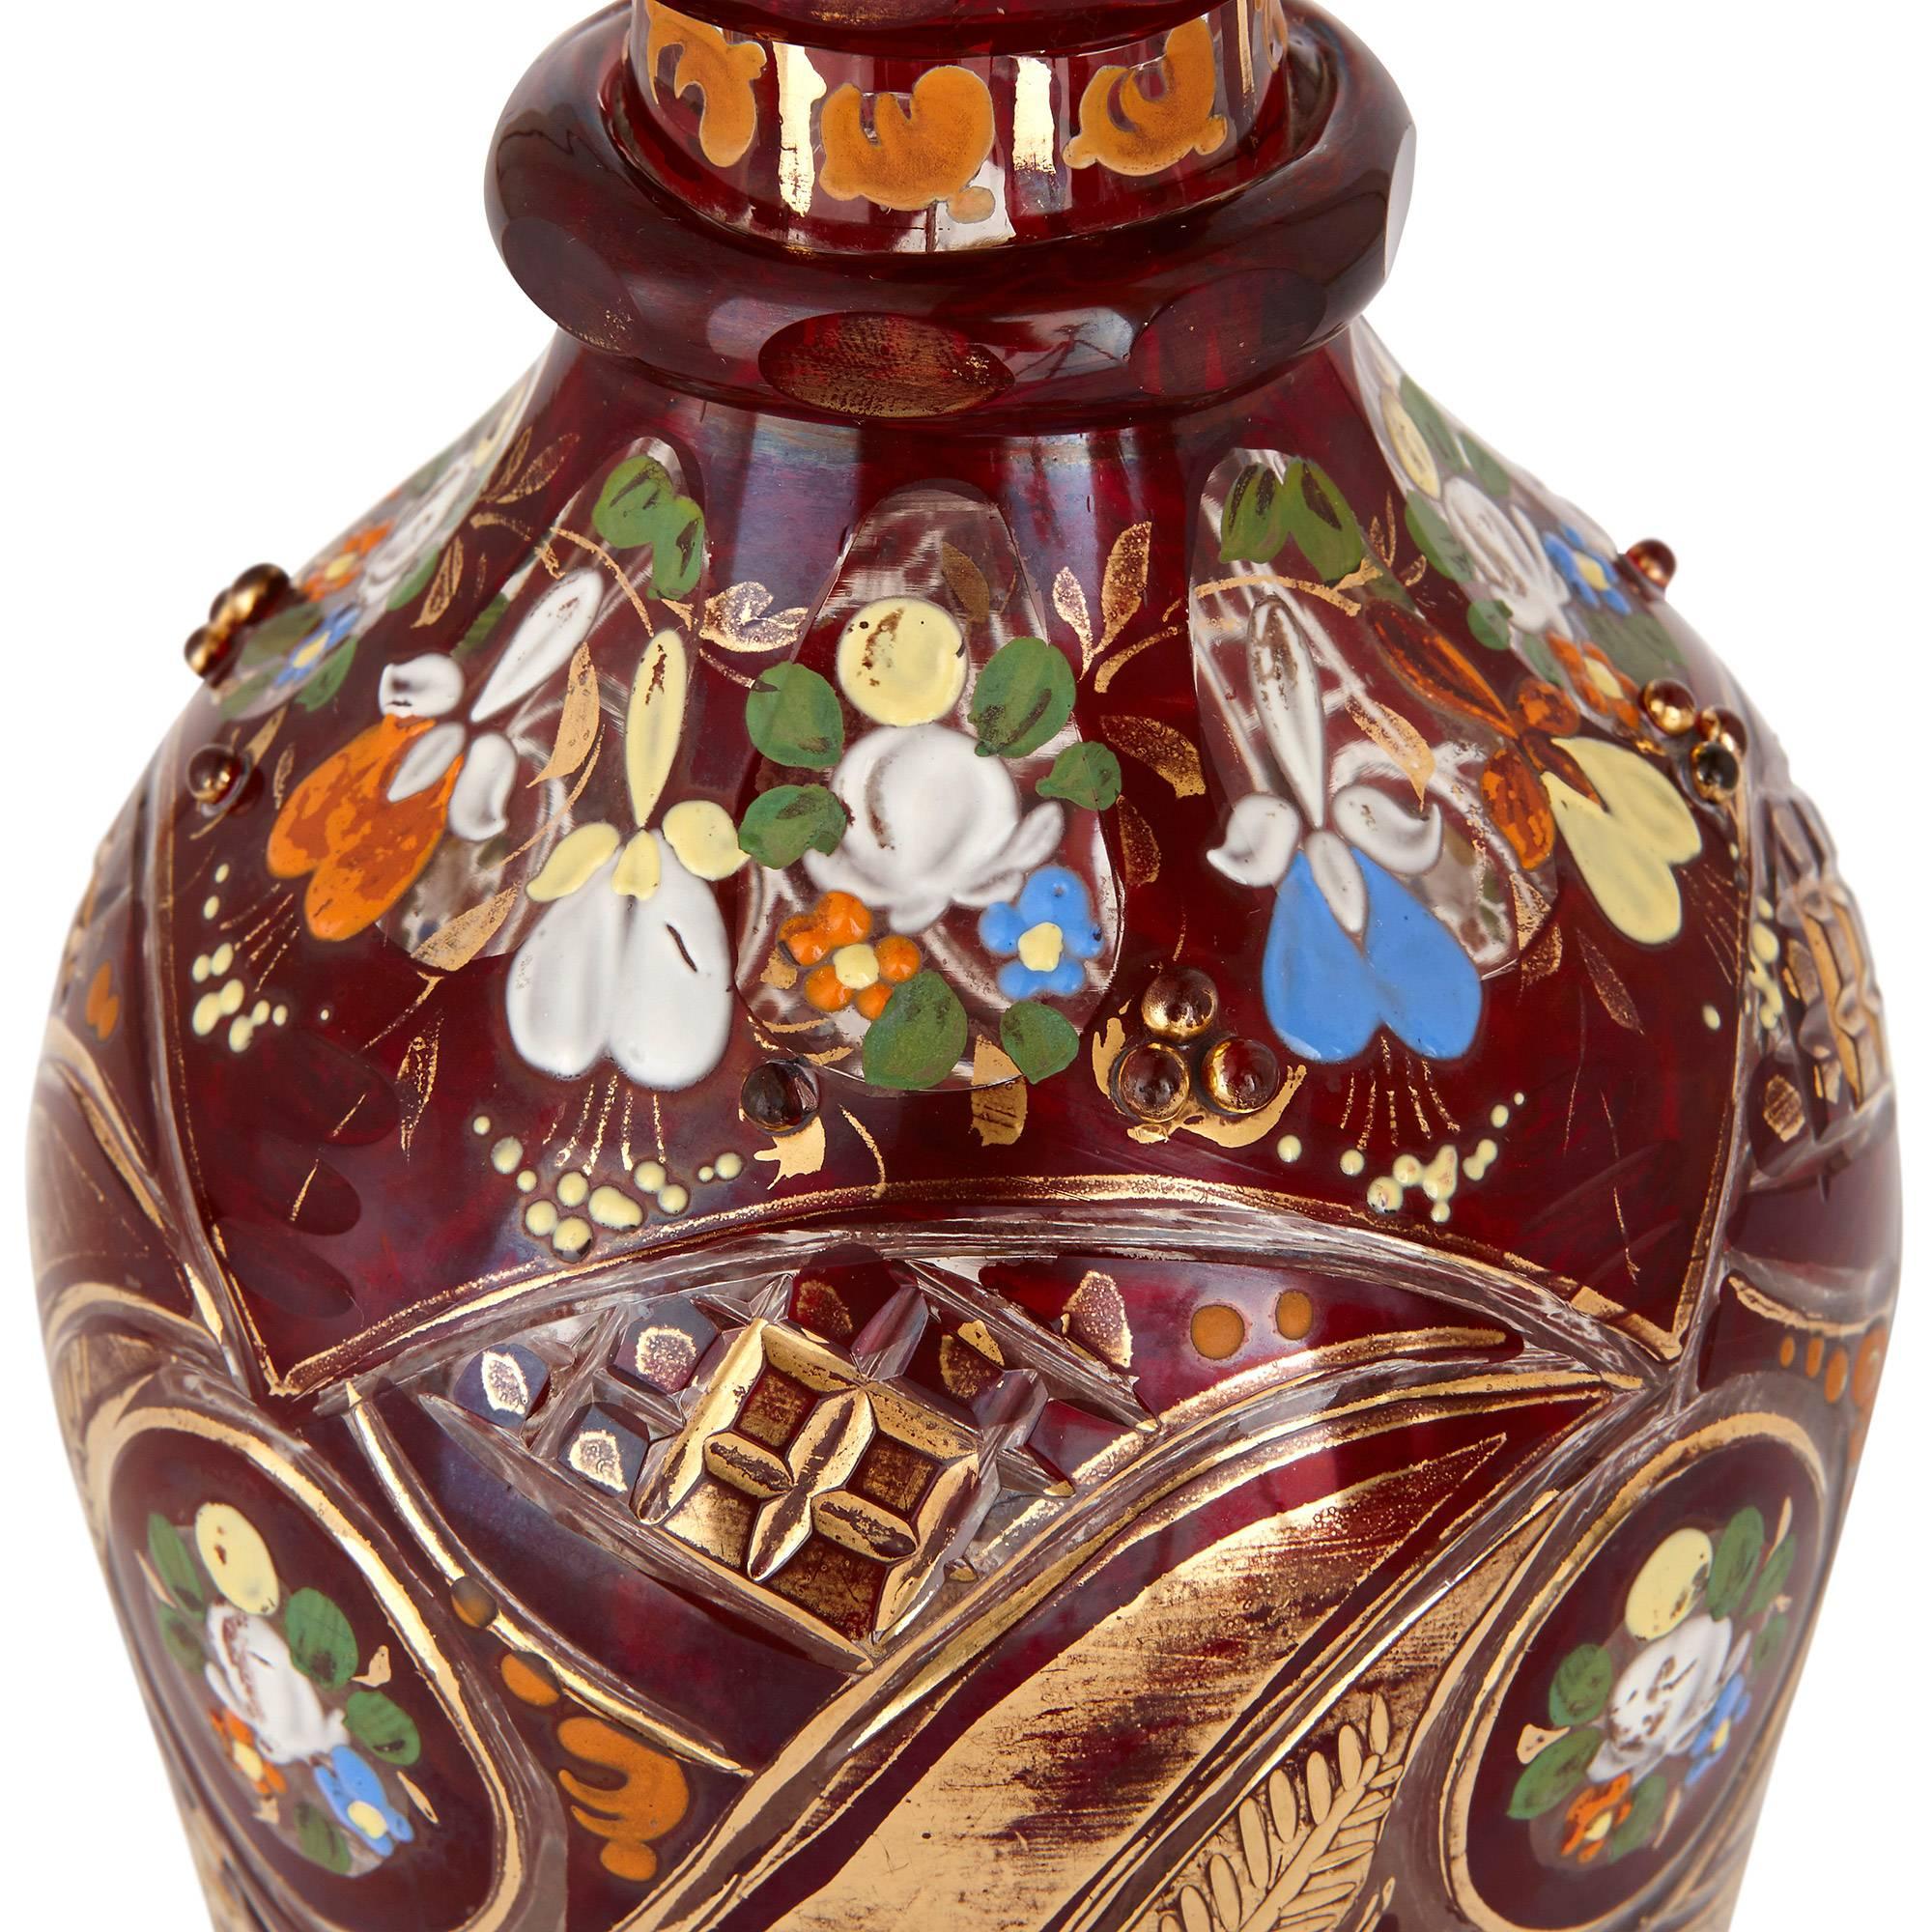 The decanter with octagonal ring knoped neck and faceted body and surmounted with a conical stopper, the ruby colored glass decorated throughout with painted flower bouquets and gilt highlights.

This opulent glass decanter exemplifies Bohemian